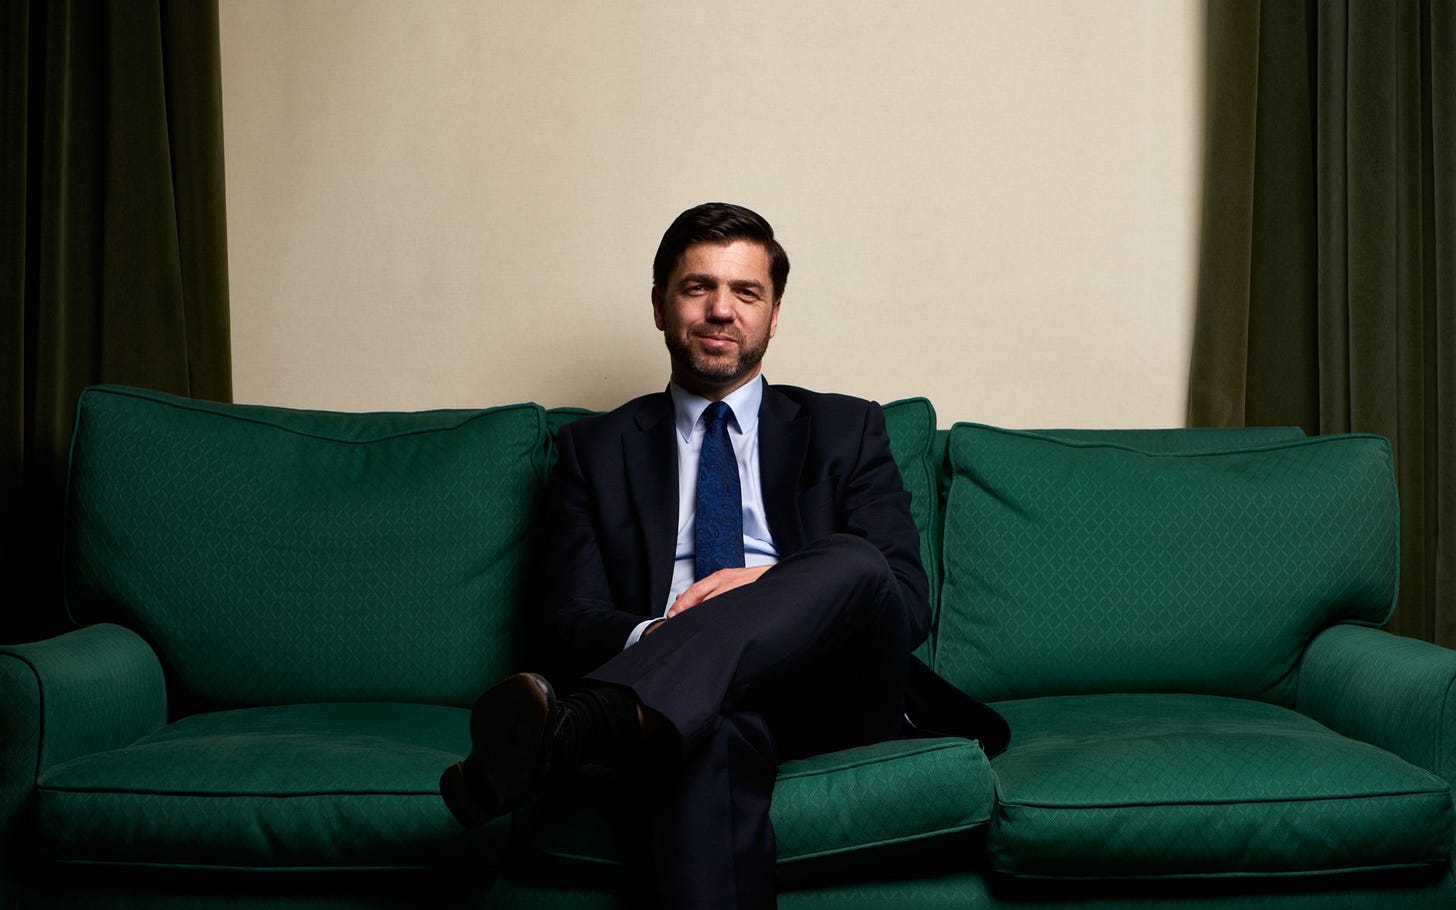 Ex-minister Stephen Crabb becomes first Tory MP investigated under party's  new code